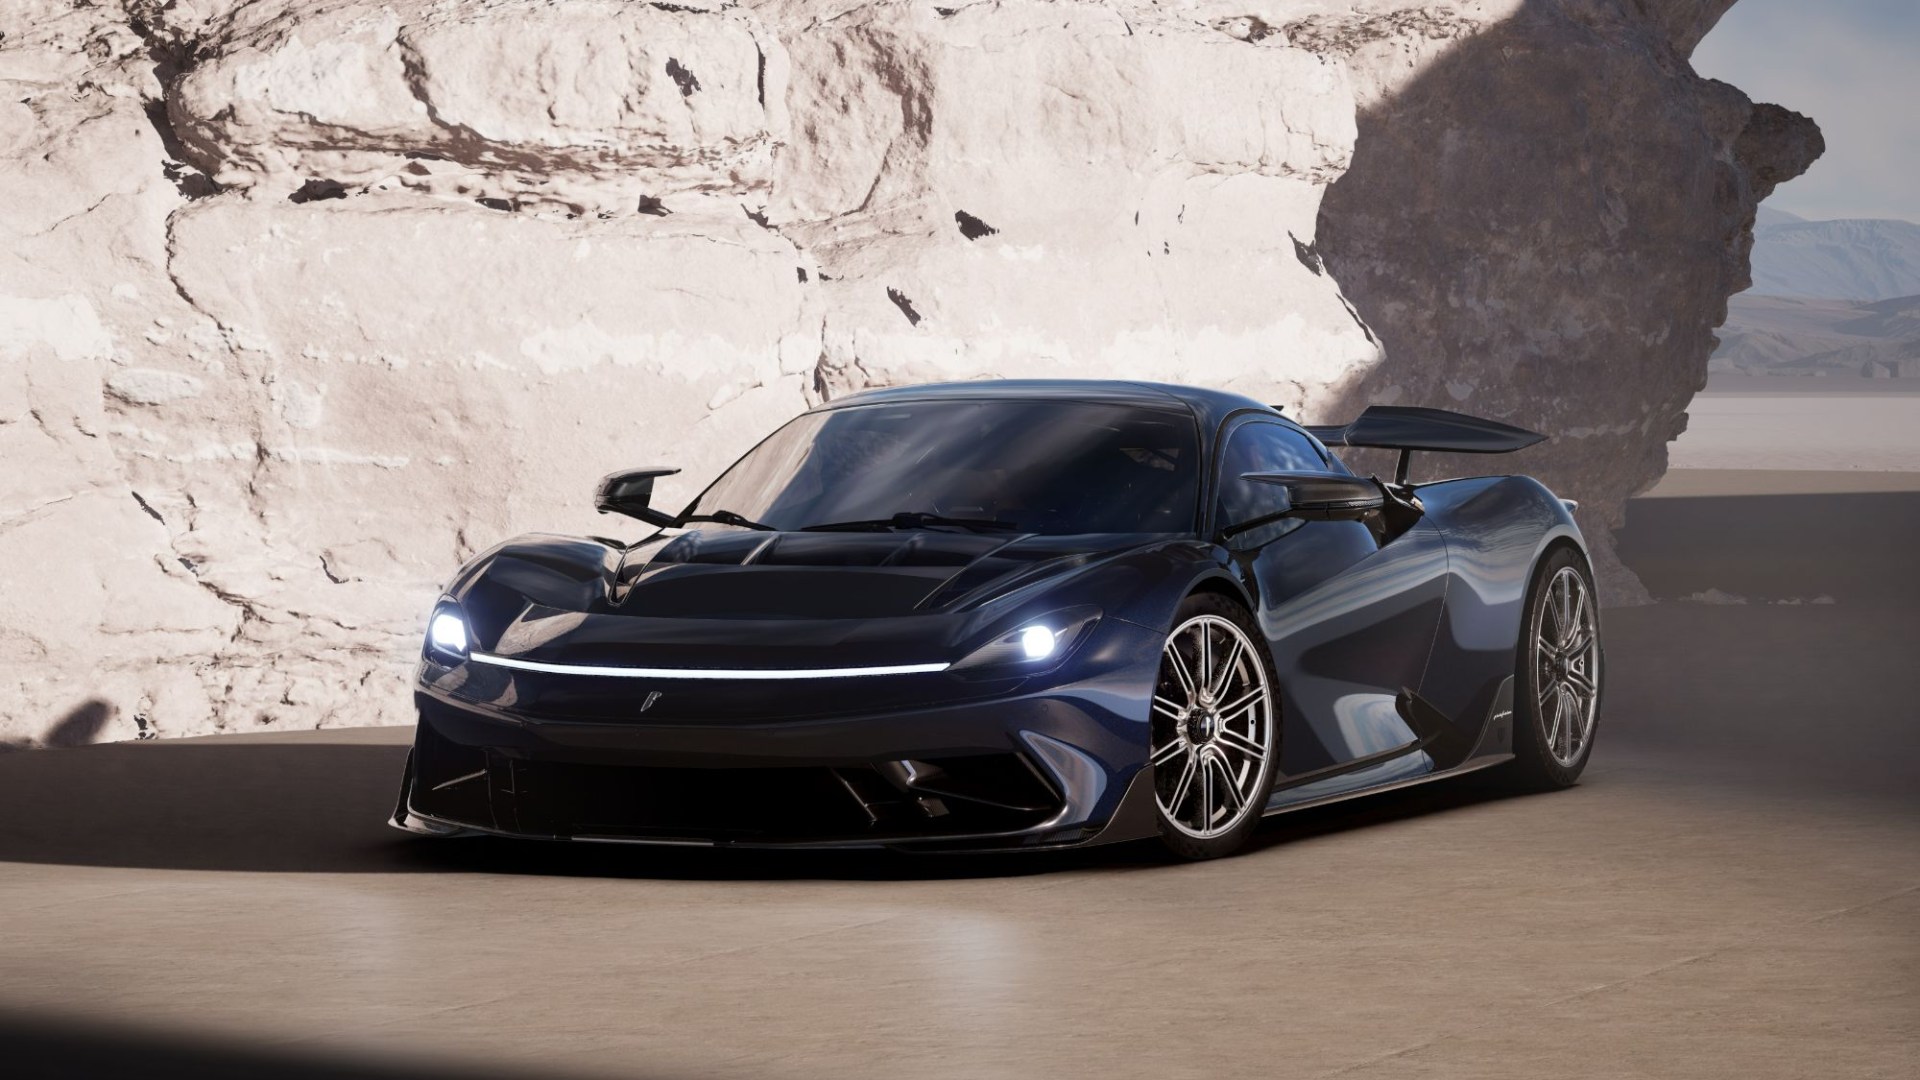 Supercar brand reveals two unique Batman-inspired models – including EV thats faster than a Formula One car [Video]